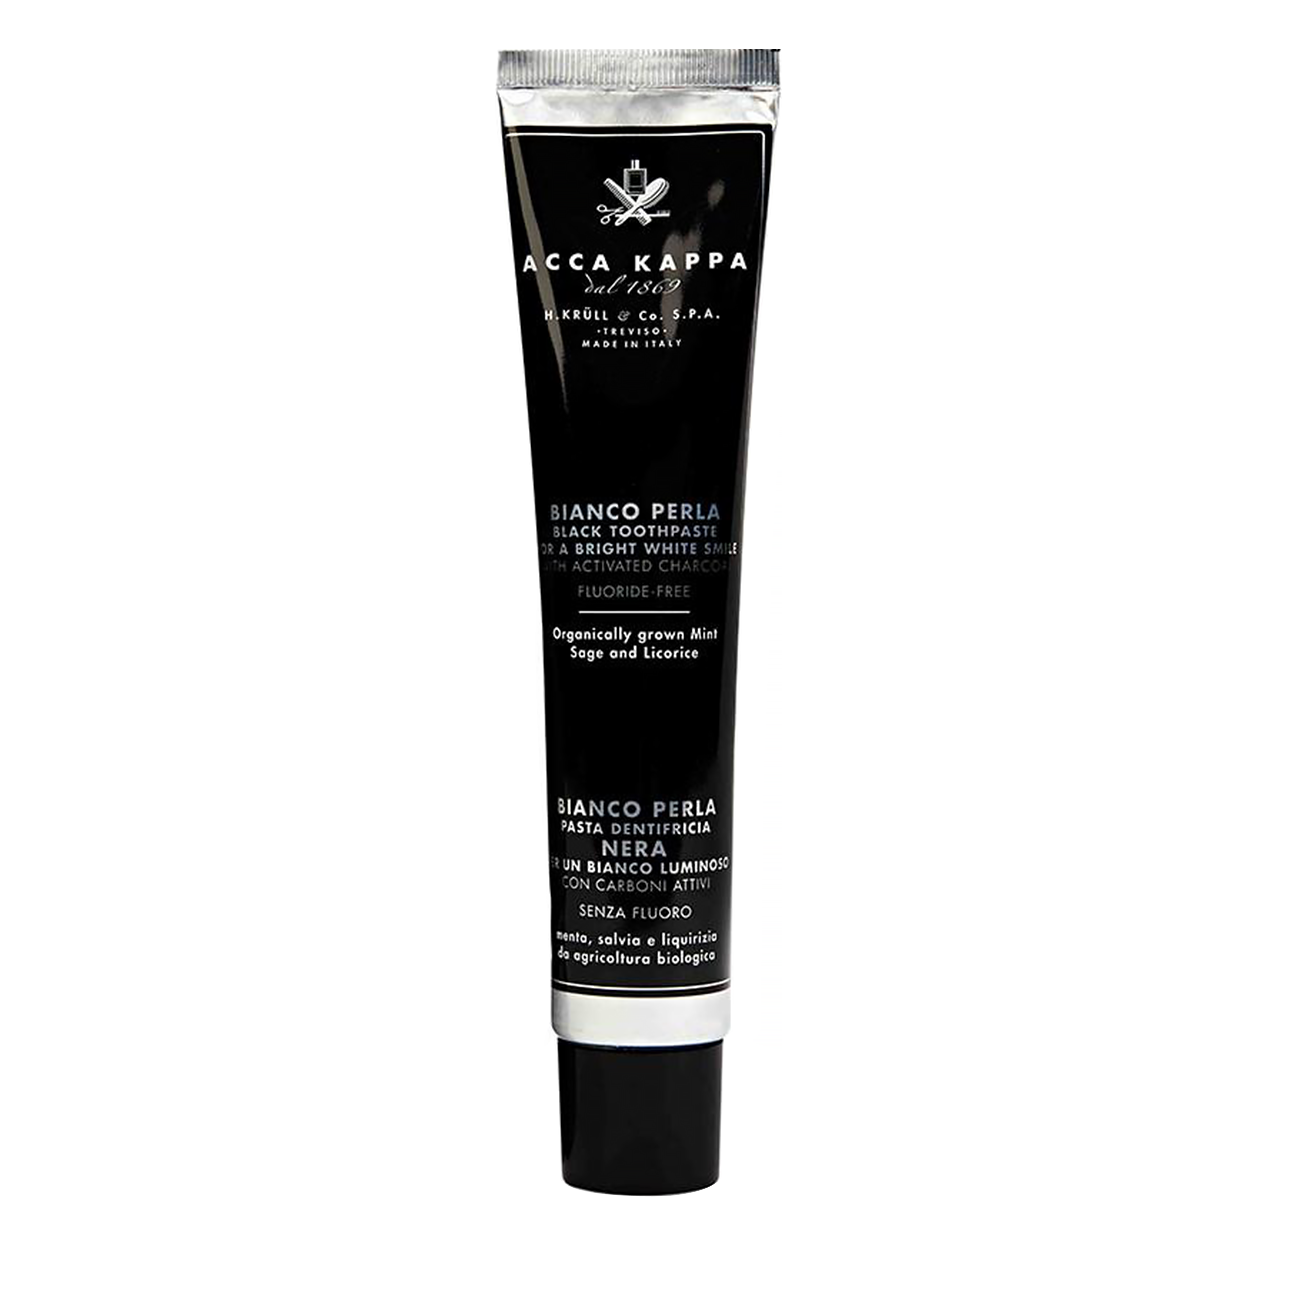 Produs pentru baie Acca Kappa BLACK TOOTHPASTE FOR A BRIGHT WHITE SMILE WITH ACTIVATED CHARCOAL 100ml cu comanda online